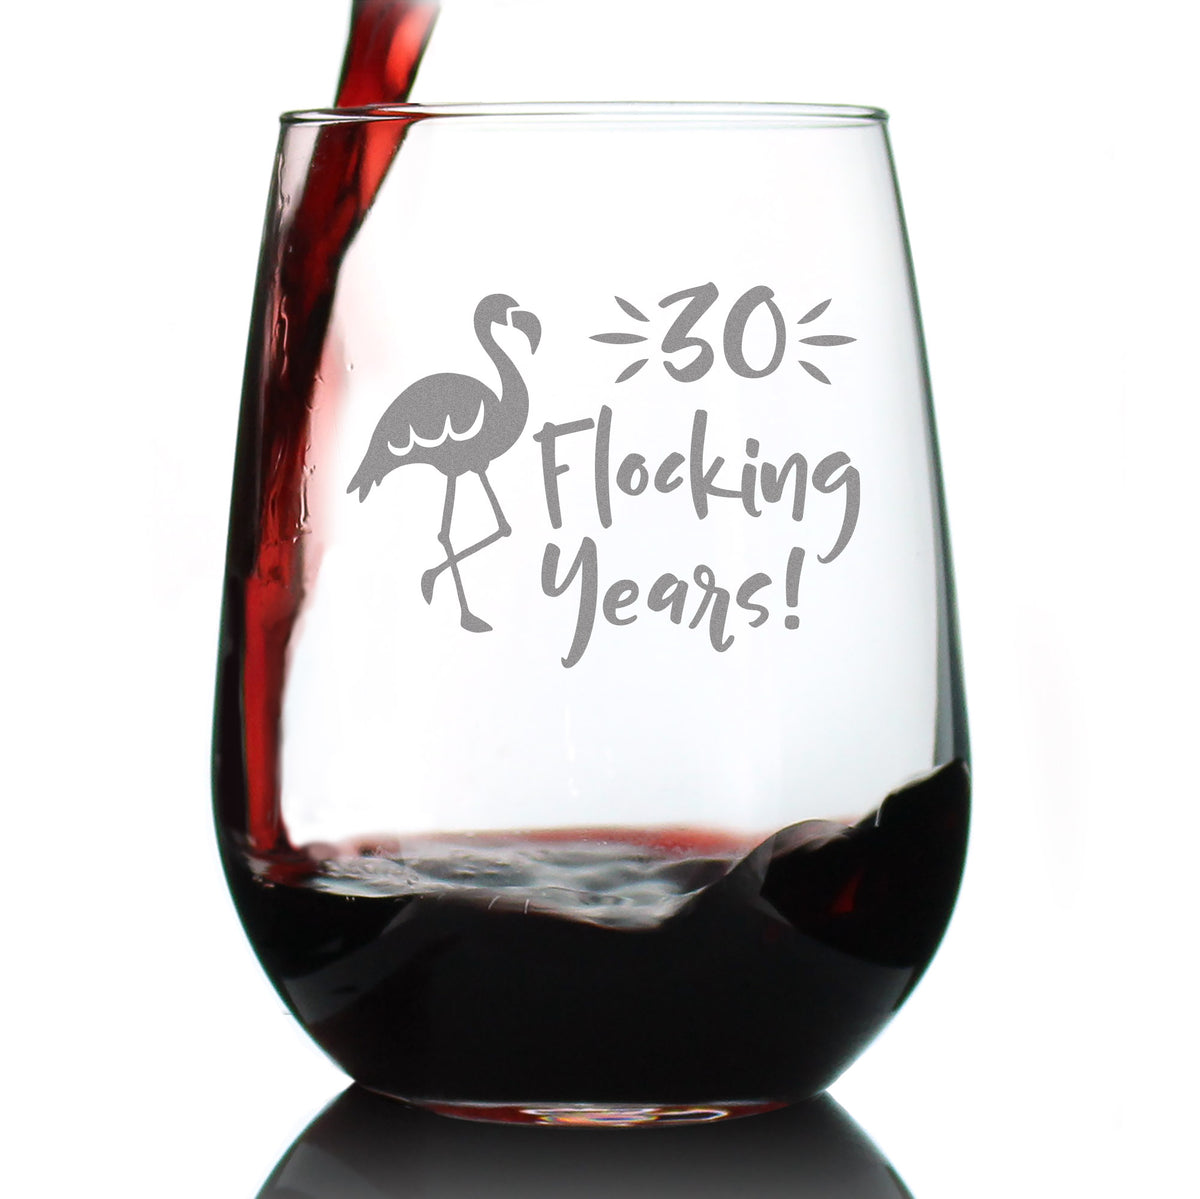 30 Flocking Years - Funny Flamingo Stemless Wine Glass Gift for 30th Birthday, Anniversary or Reunion - Large